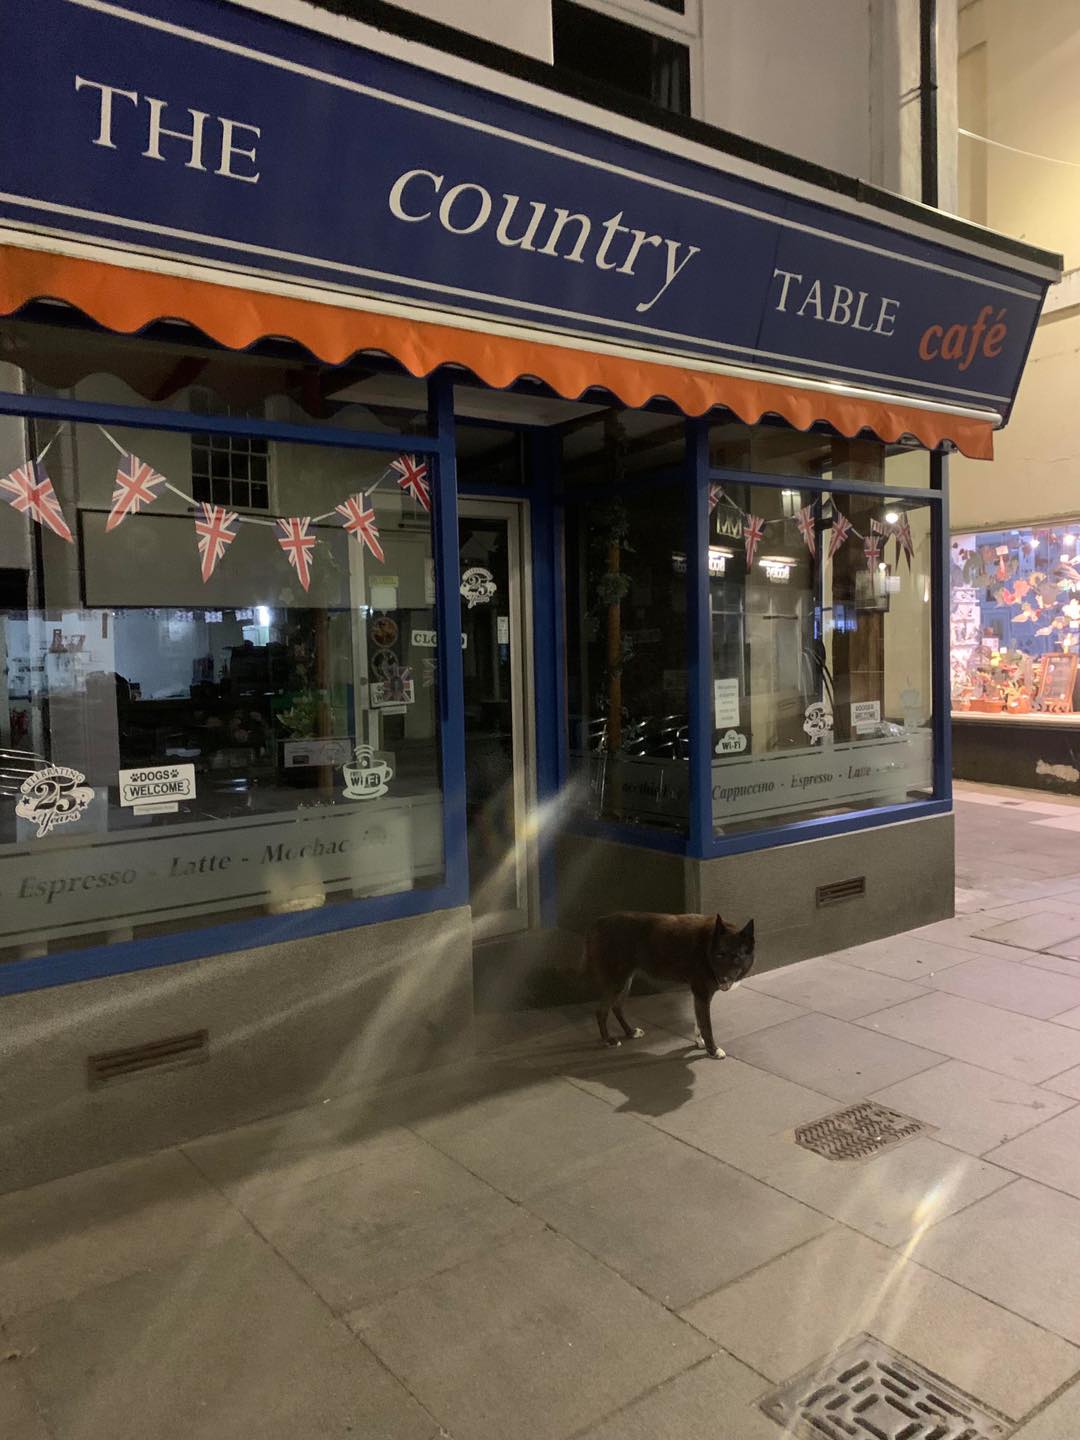 The Country Table Cafe